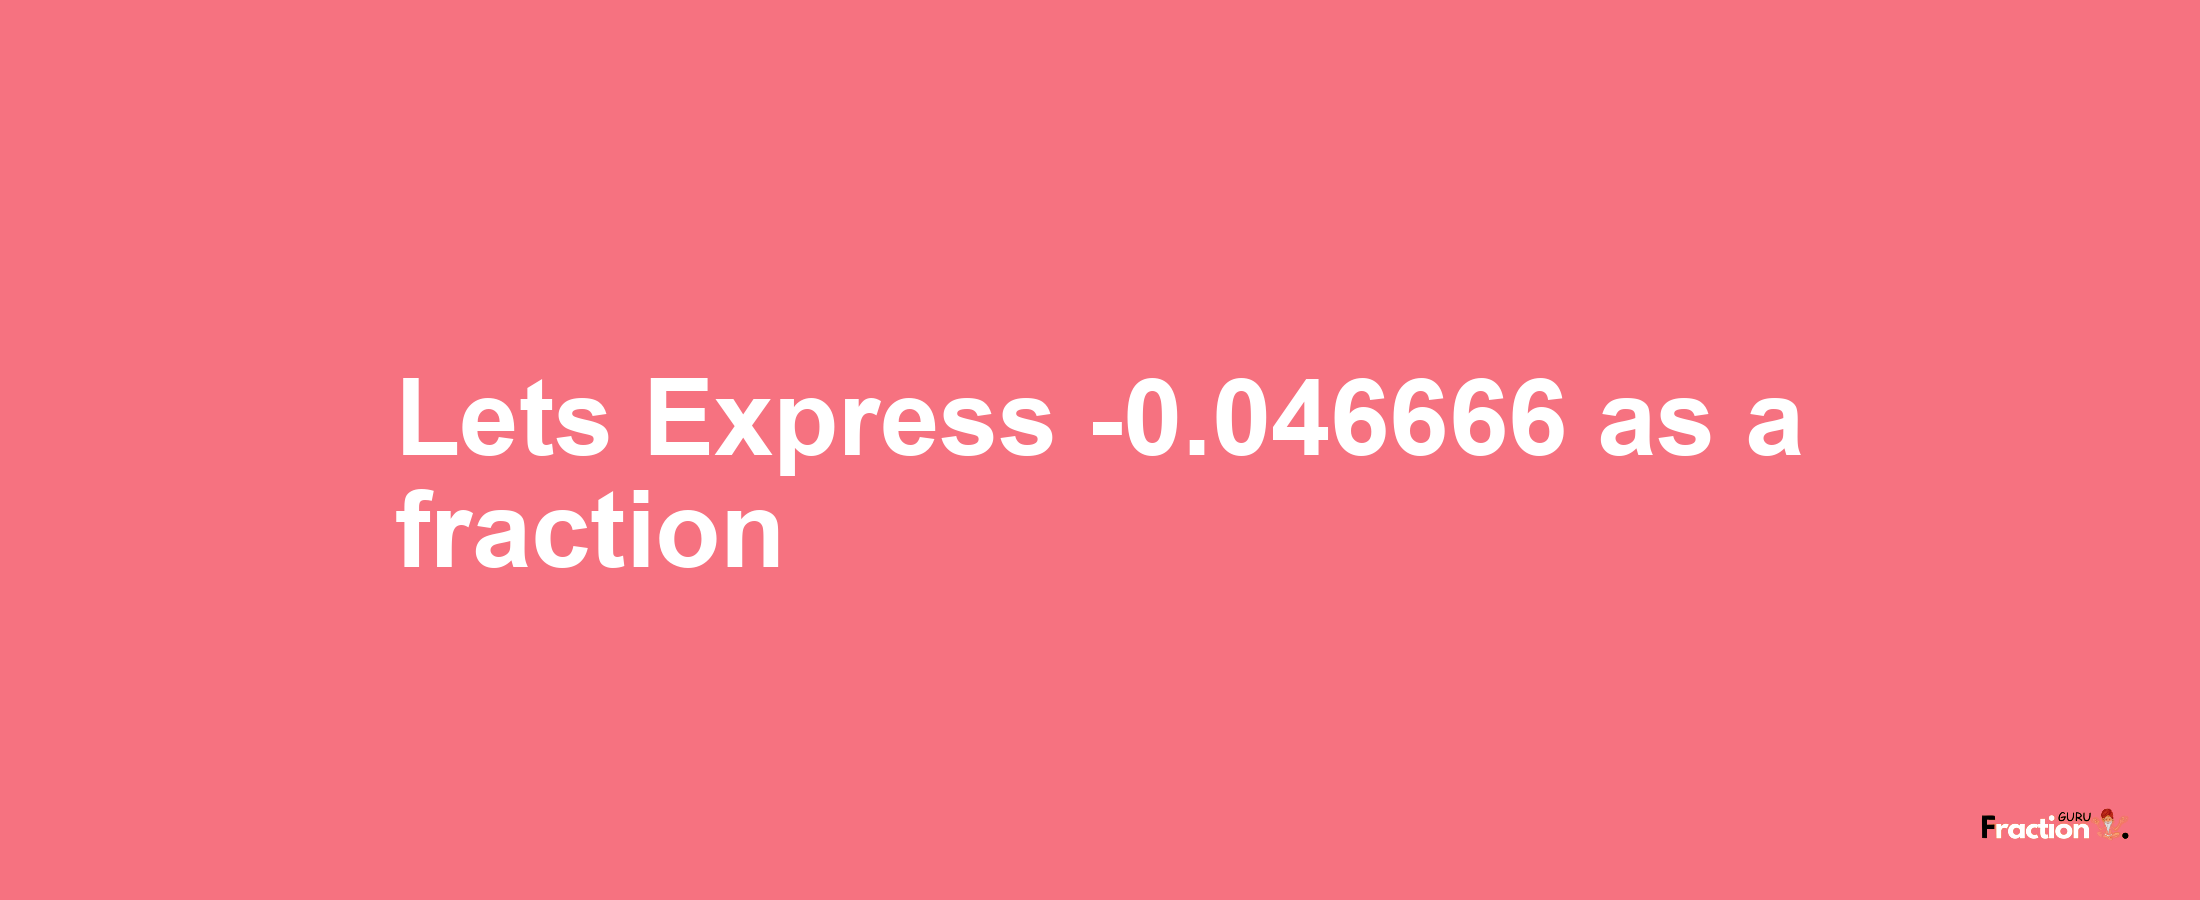 Lets Express -0.046666 as afraction